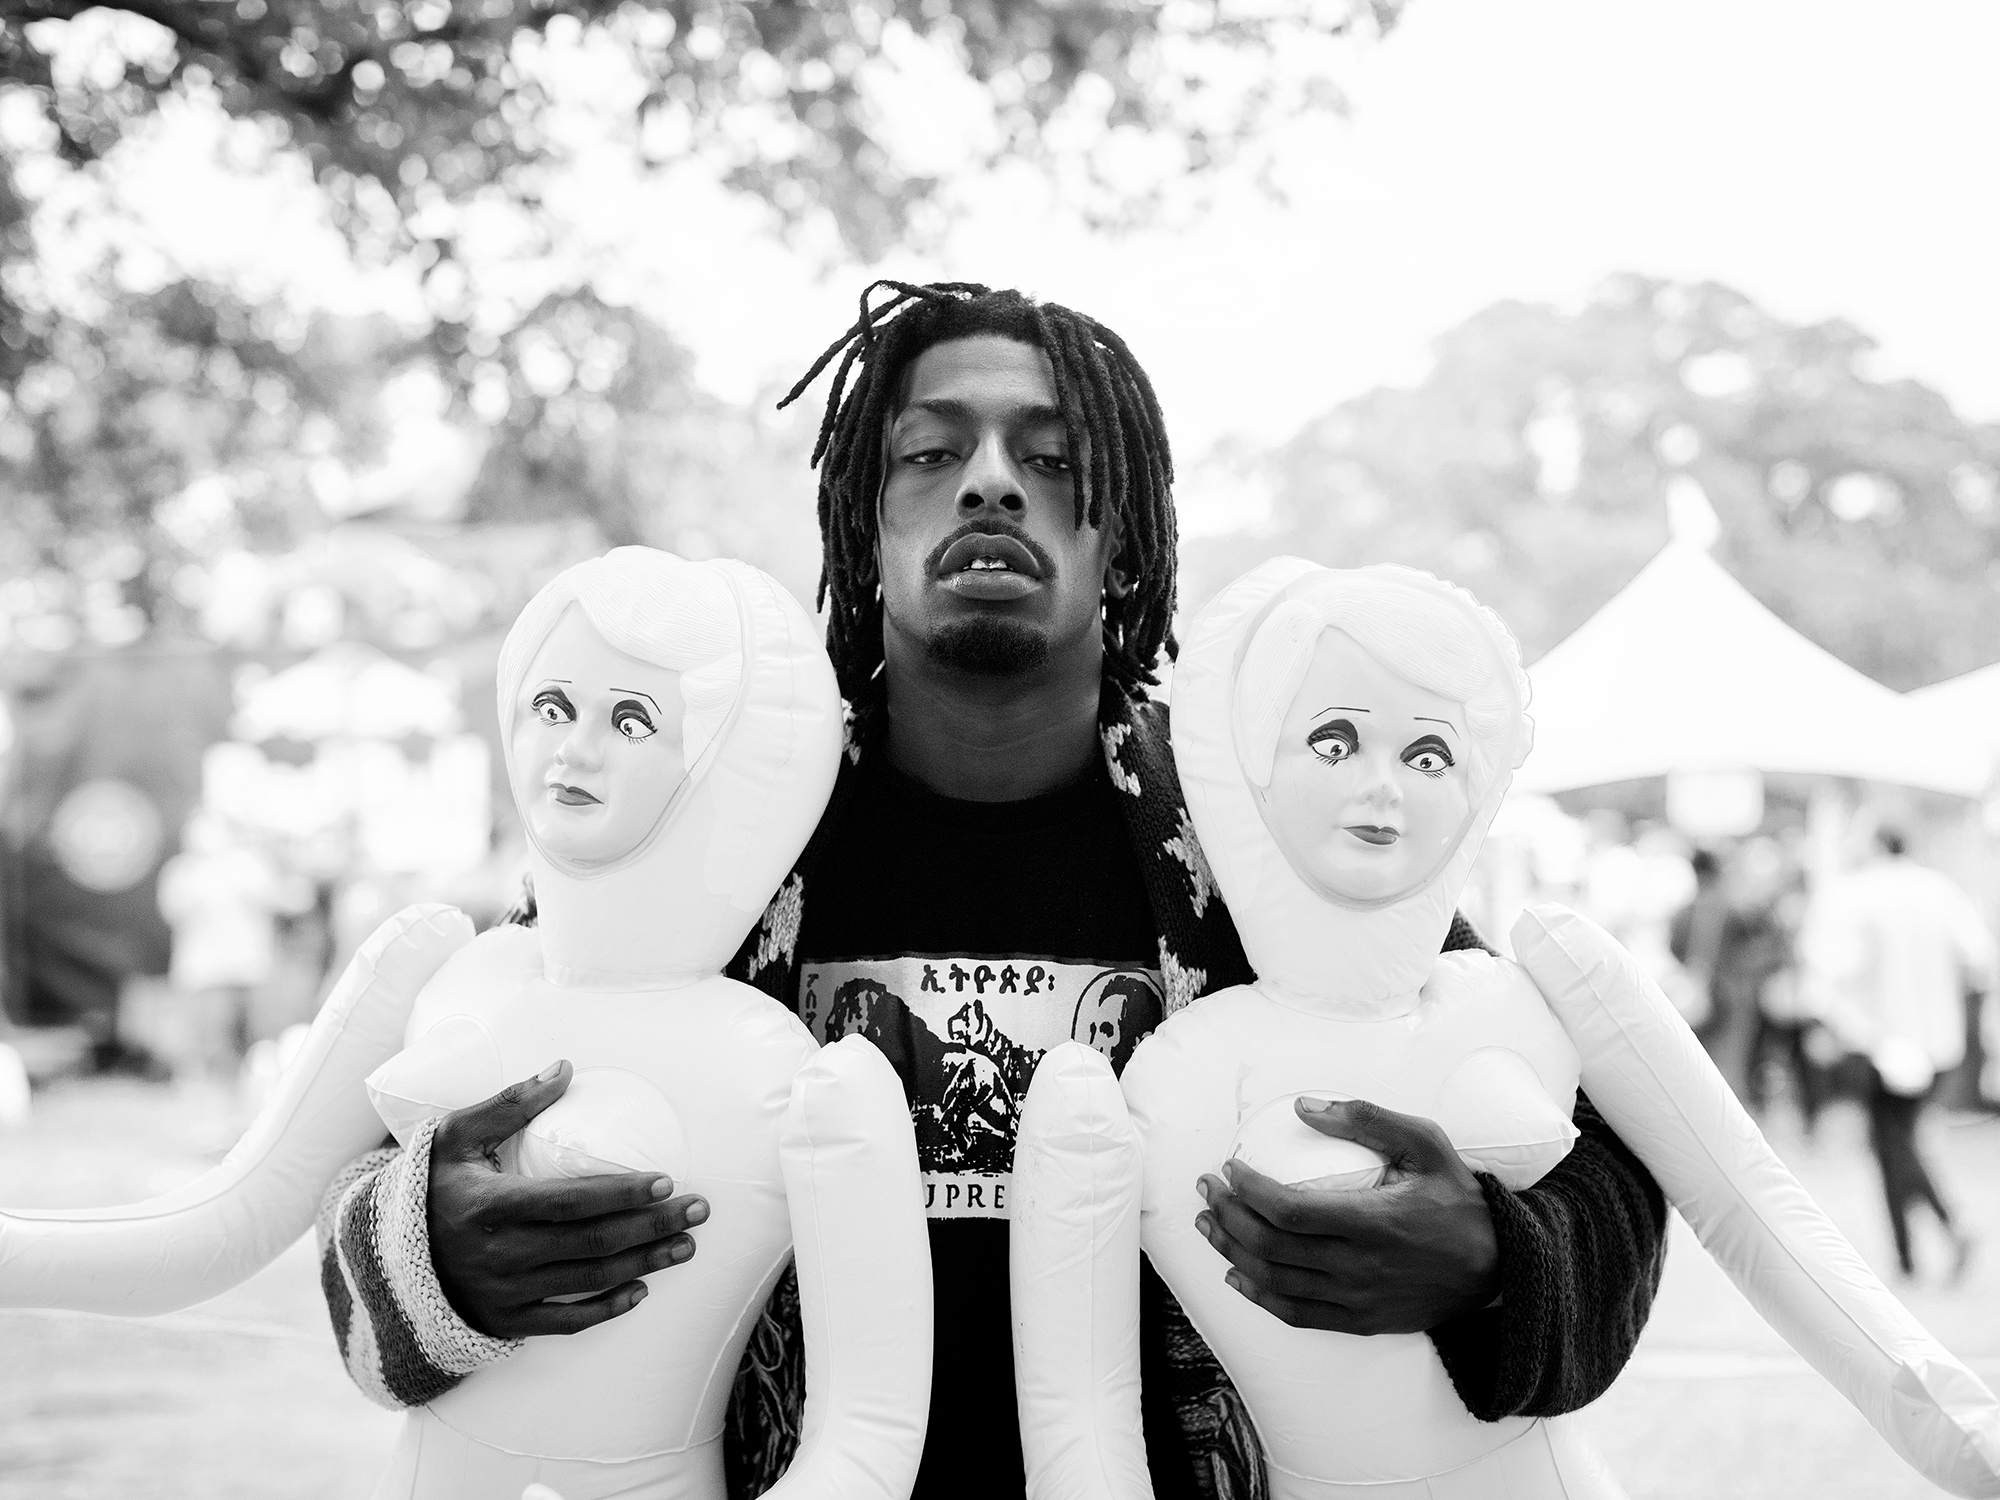 Meechy Darko, rapper and member of Flatbush Zombies, holds two blow up dolls backstage during the Fun Fun Fun Fest music festival, photographed by Houston music and entertainment photographer, Todd Spoth.